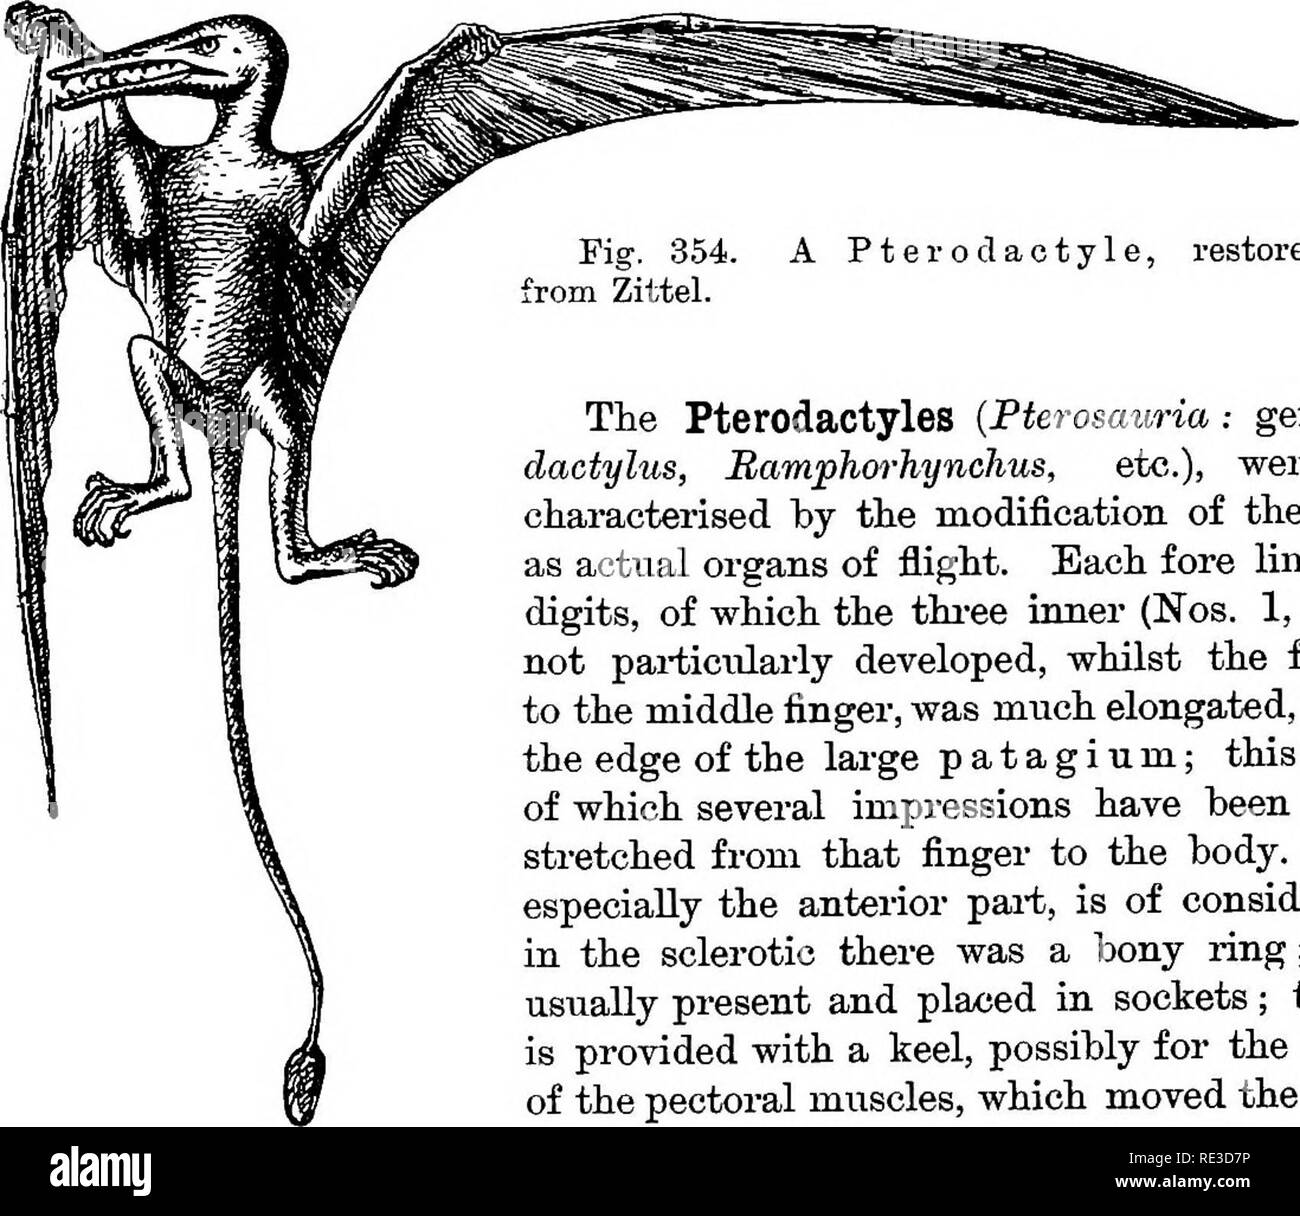 . Text book of zoology. Zoology. Fig. 353. A Plesiosaiirian. as in the latter, are clawless, and like the fins of a Whale; they are, however, xisually larger than in the Ichthyosauj-ians, the bones are not so much shortened, and the number of digits does not exceed five. They attaia a length equal to that of the Ichthyostarians. Triassic, Jtu-assic, Cretaceoiis.. A Pteroclactyle, restored.—Modified The Fterodactyles {Pterosauria : genera Ptero- dactylus, Bamphm-hynchus, etc.), were specially characterised by the modification of the fore limbs as actual organs of fiight. Each fore limb had four Stock Photo